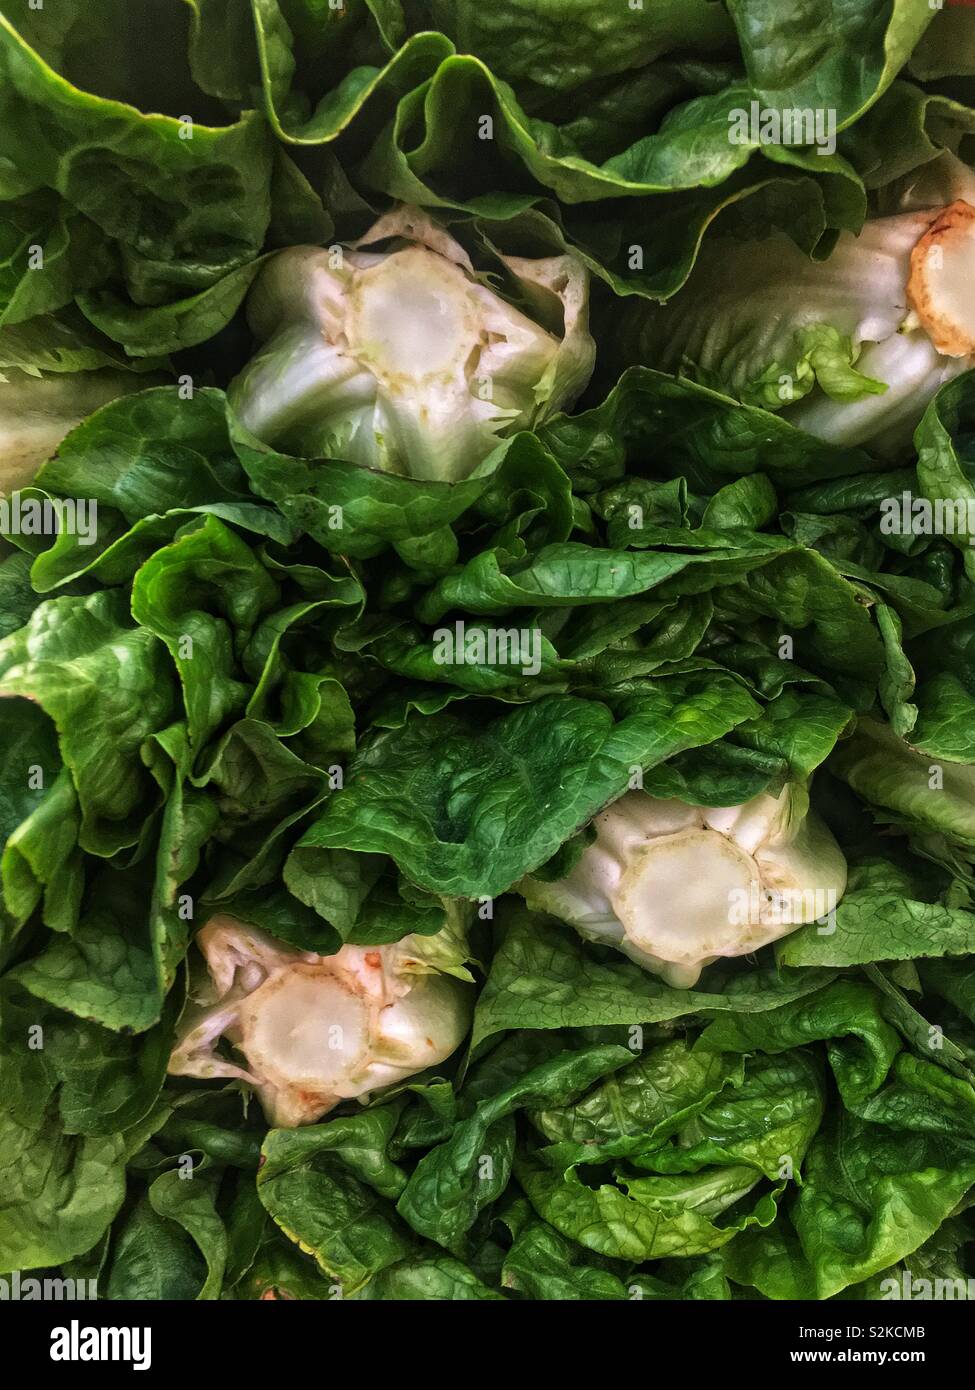 Full frame of fresh delicious ripe green romaine lettuce salad stacked and piled high and displayed for sale at the local produce vendor. Stock Photo